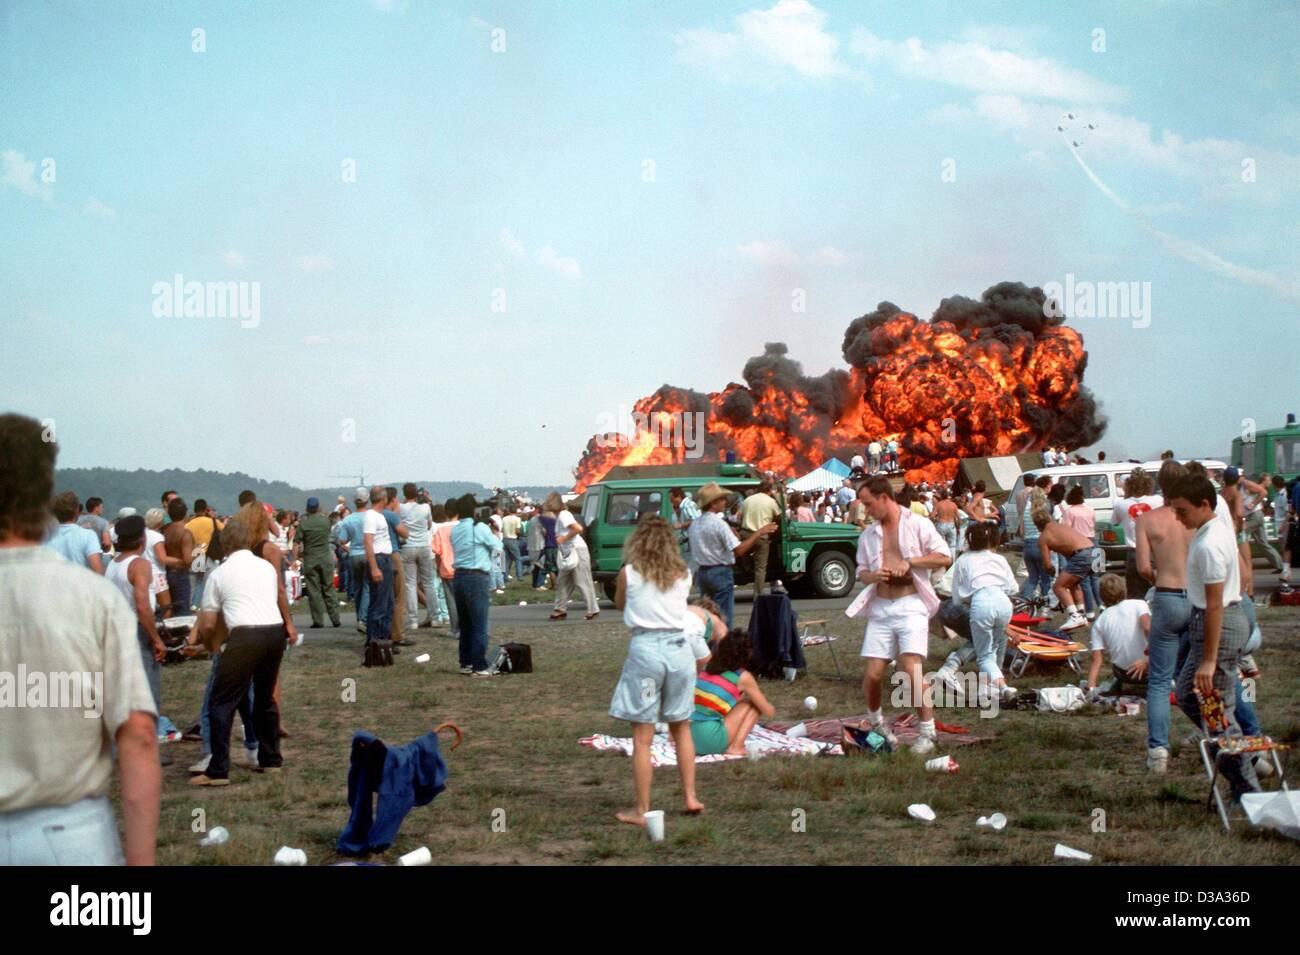 dpa files) - A group of horrified people watch the disastrous plane crash  during the aviation show at the US air base in Ramstein, West Germany, 28  August 1988. A jet of